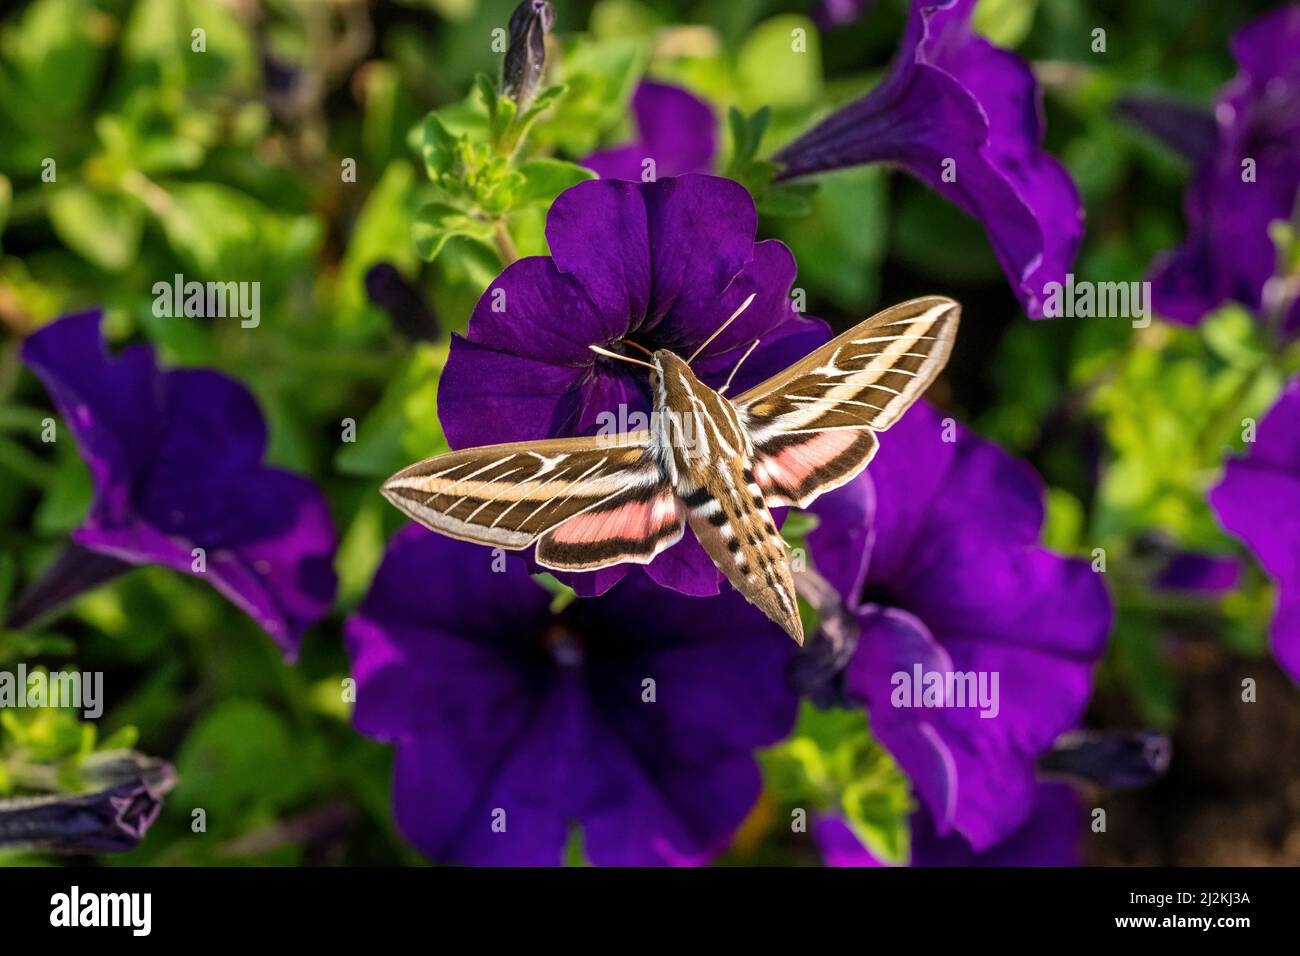 A White-Lined Sphinx Moth (Hyles lineata) pollinating a purple Petunia, in a garden setting. Stock Photo